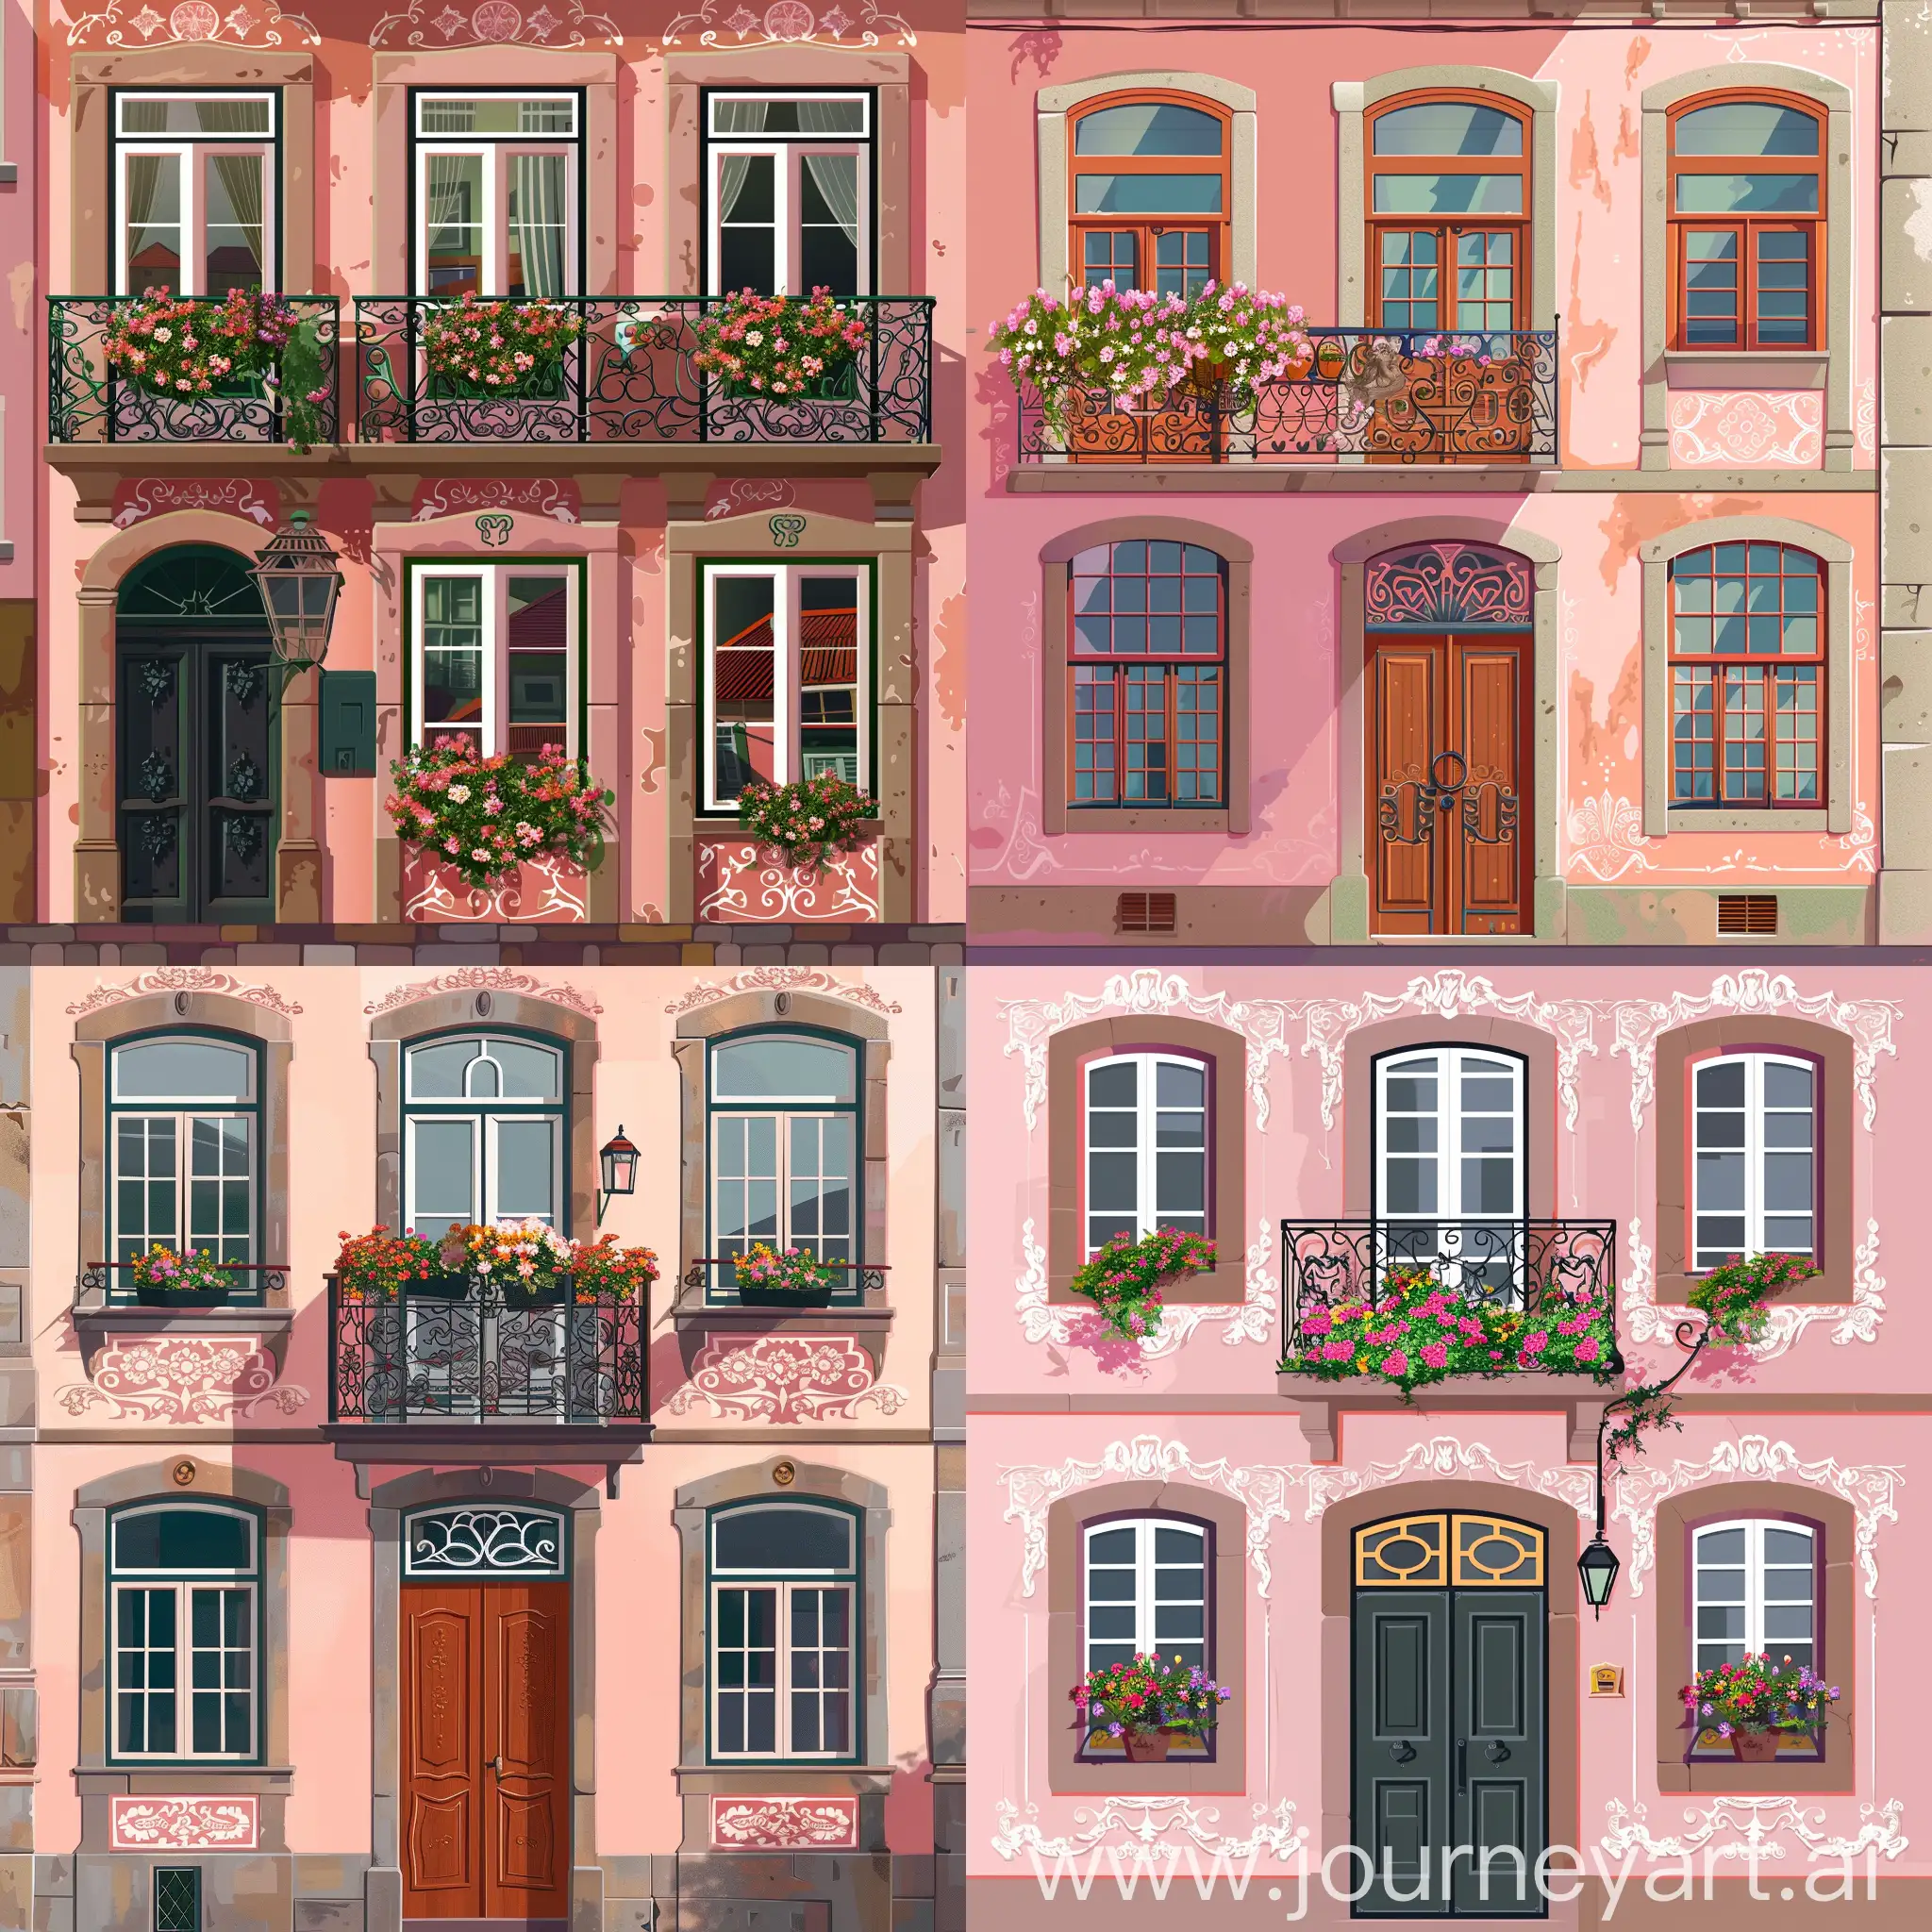 Porto-Portuguese-Style-Building-with-Pink-Walls-and-Balcony-Flowers